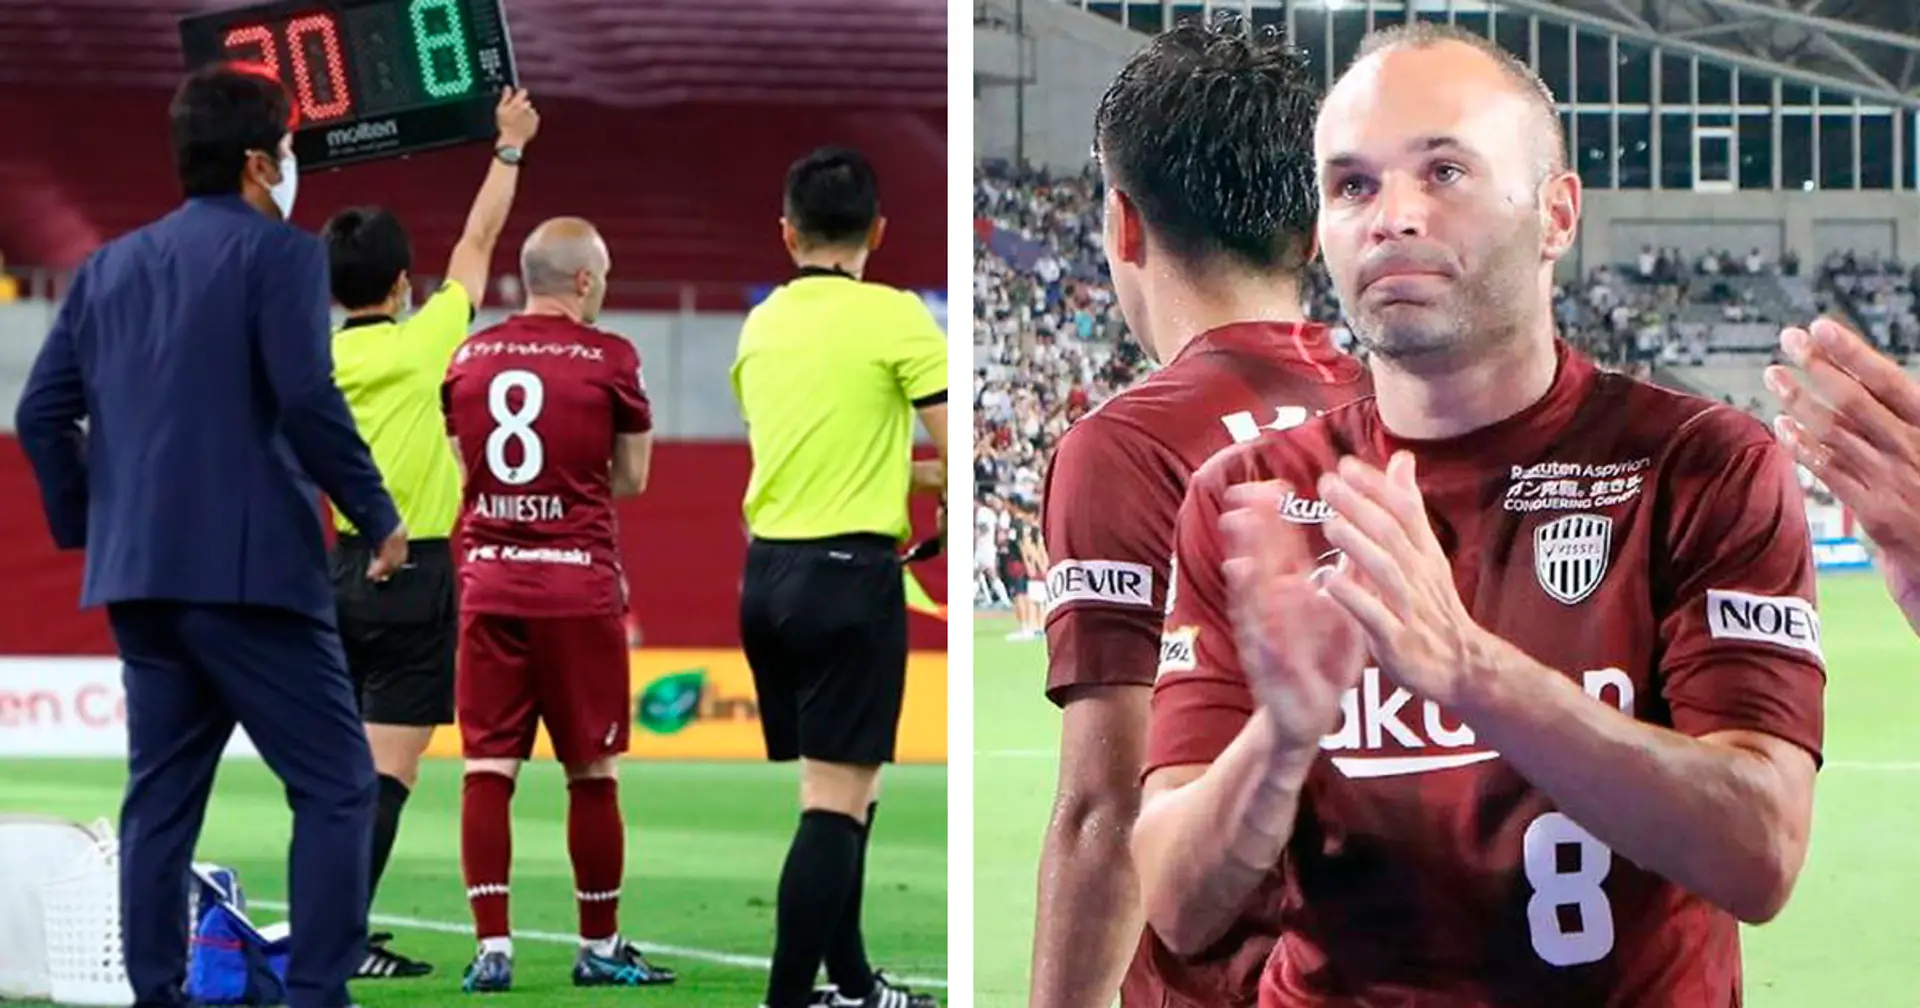 Iniesta back on the pitch for Vissel Kobe after missing 4+ months through injury